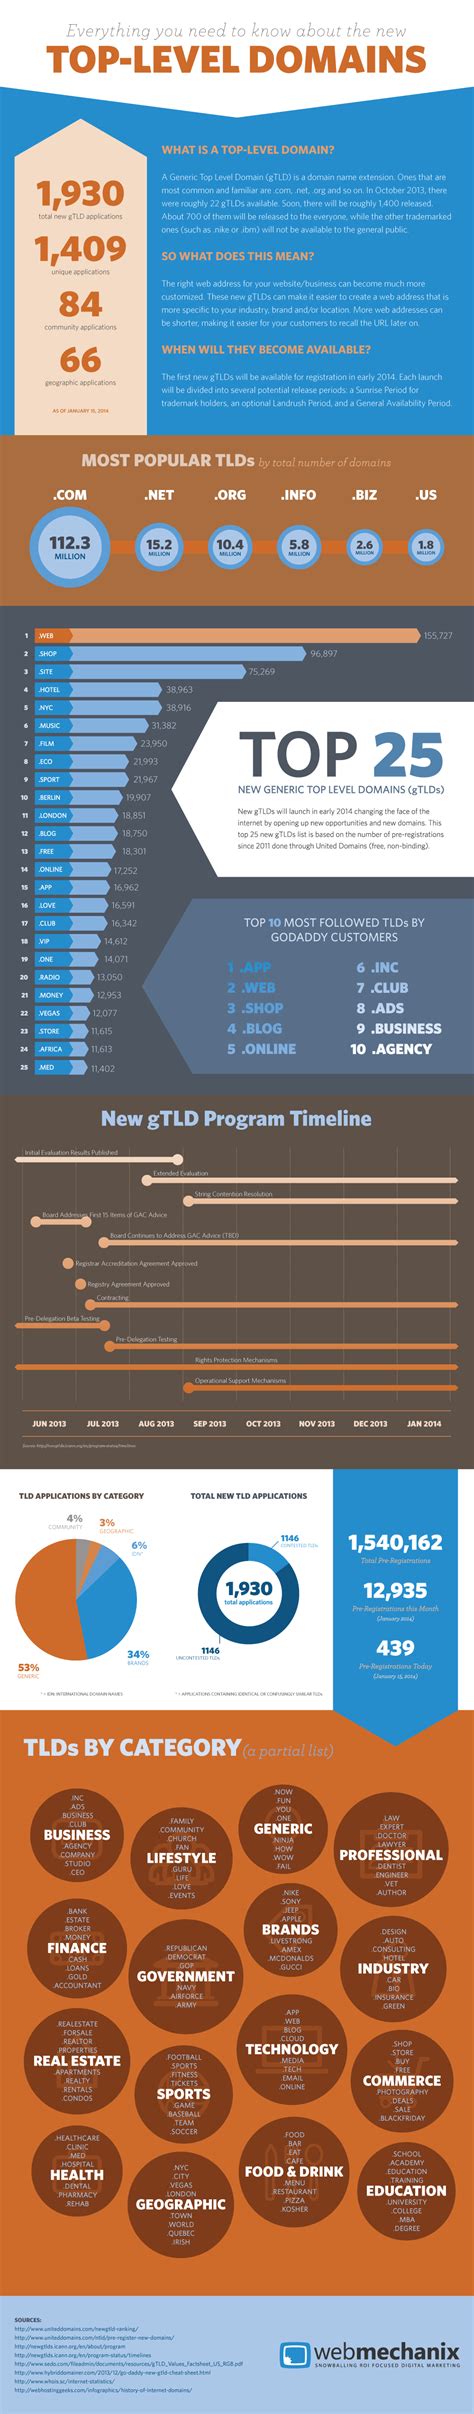 Everything You Need To Know About New Top Level Domains Infographic